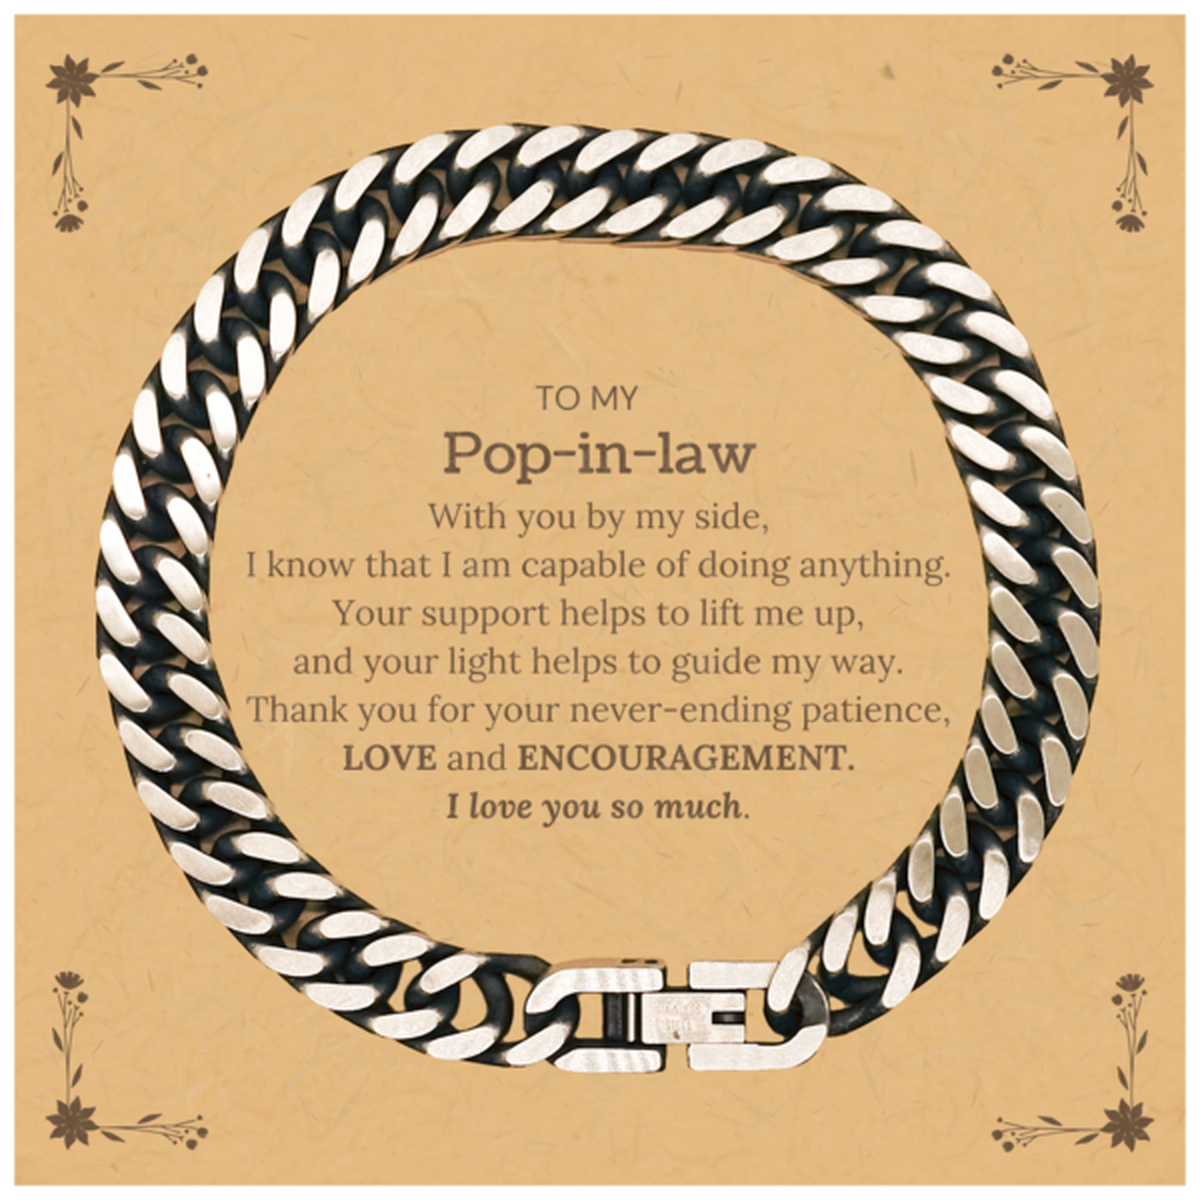 Appreciation Pop-in-law Cuban Link Chain Bracelet Gifts, To My Pop-in-law Birthday Christmas Wedding Keepsake Gifts for Pop-in-law With you by my side, I know that I am capable of doing anything. I love you so much